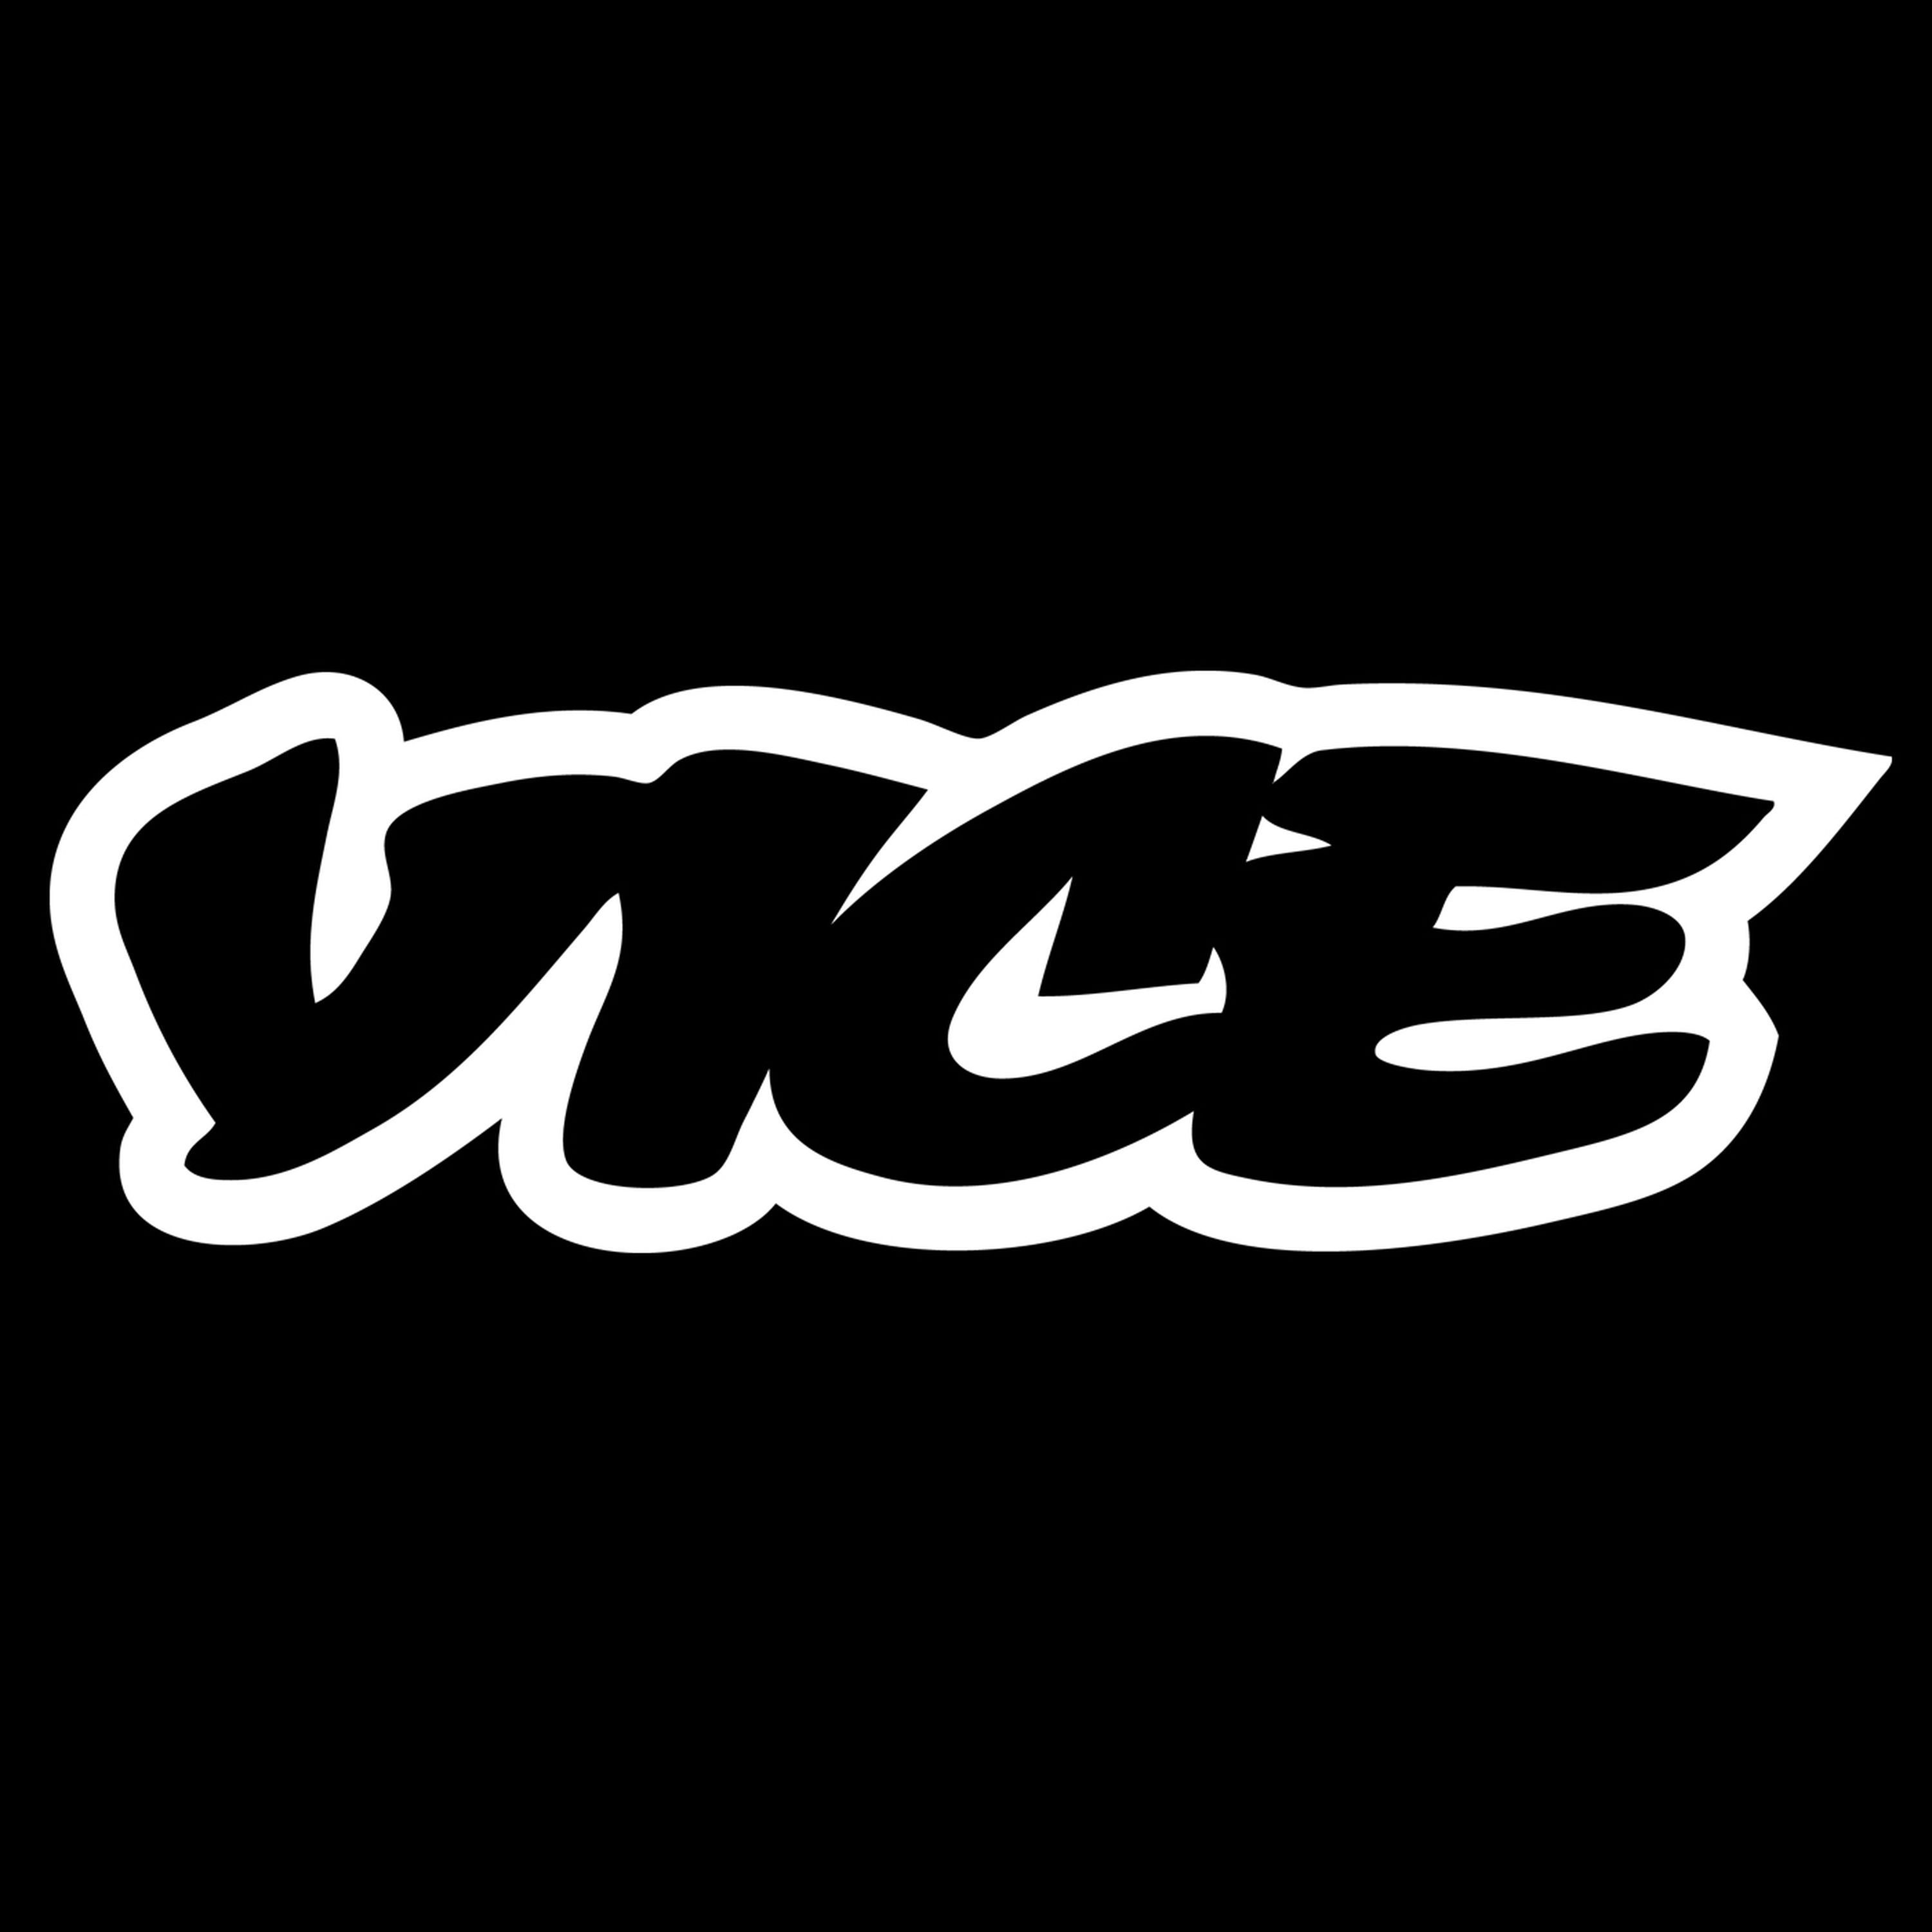 The Inner-workings of the FBI: The VICE Podcast 038